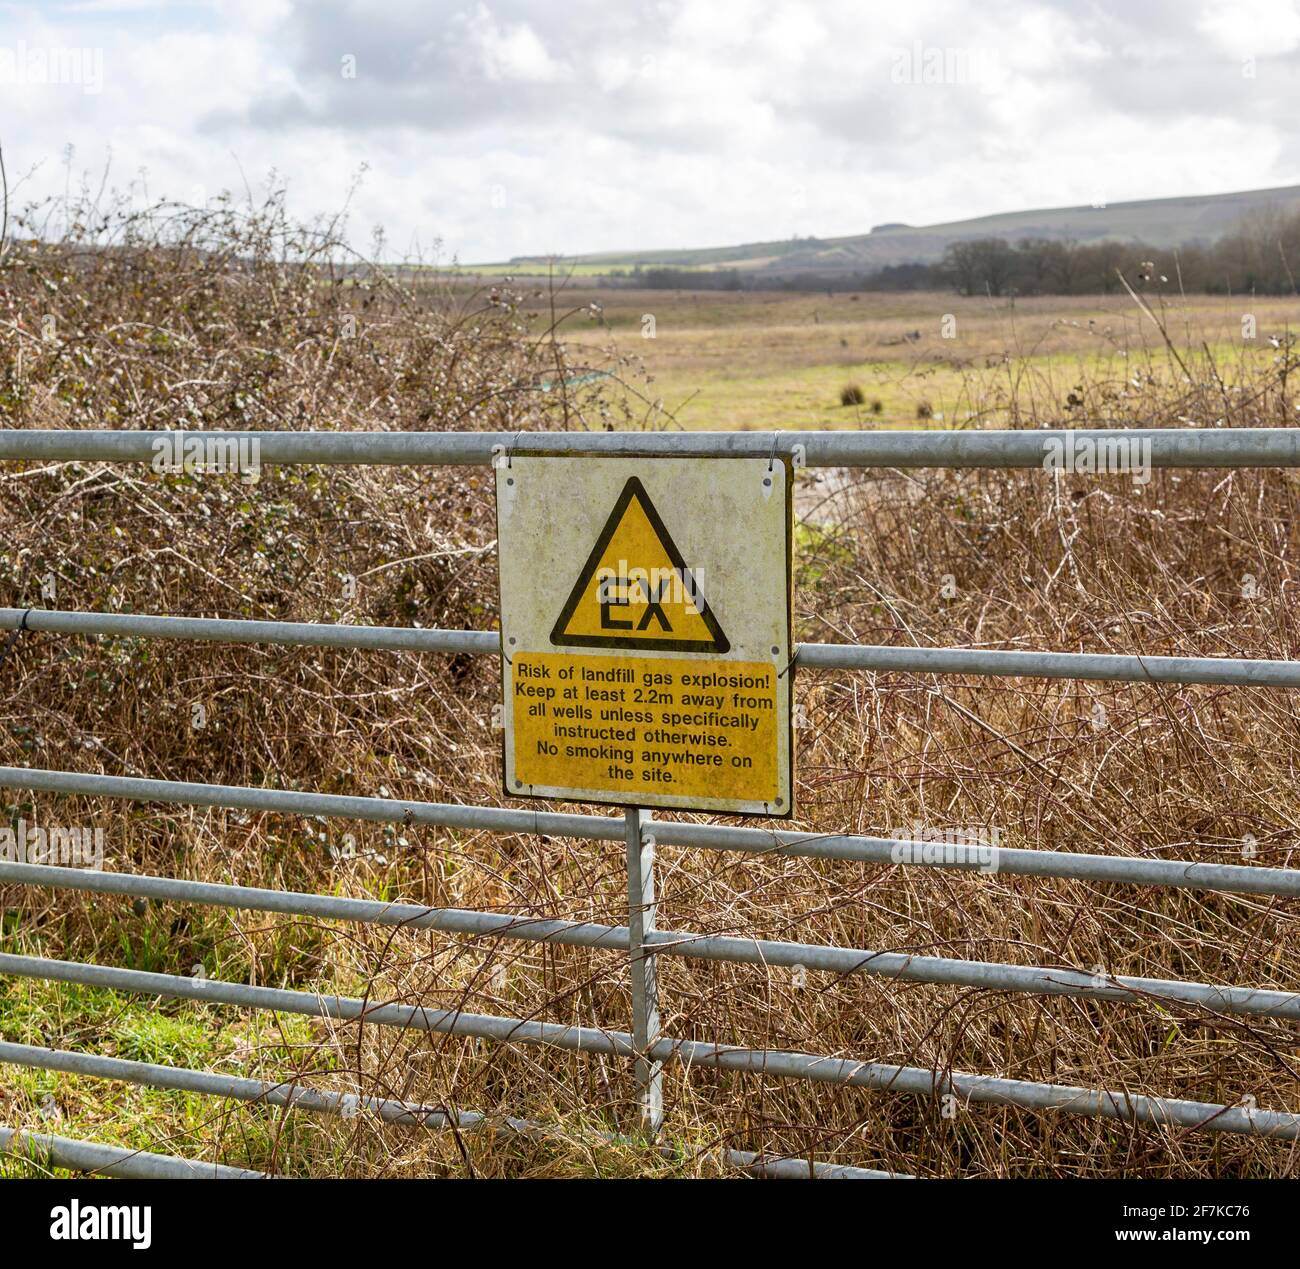 Sign warning of danger of gas explosion at landfill site, Hills waste management, Calne, Wiltshire, England, UK Stock Photo